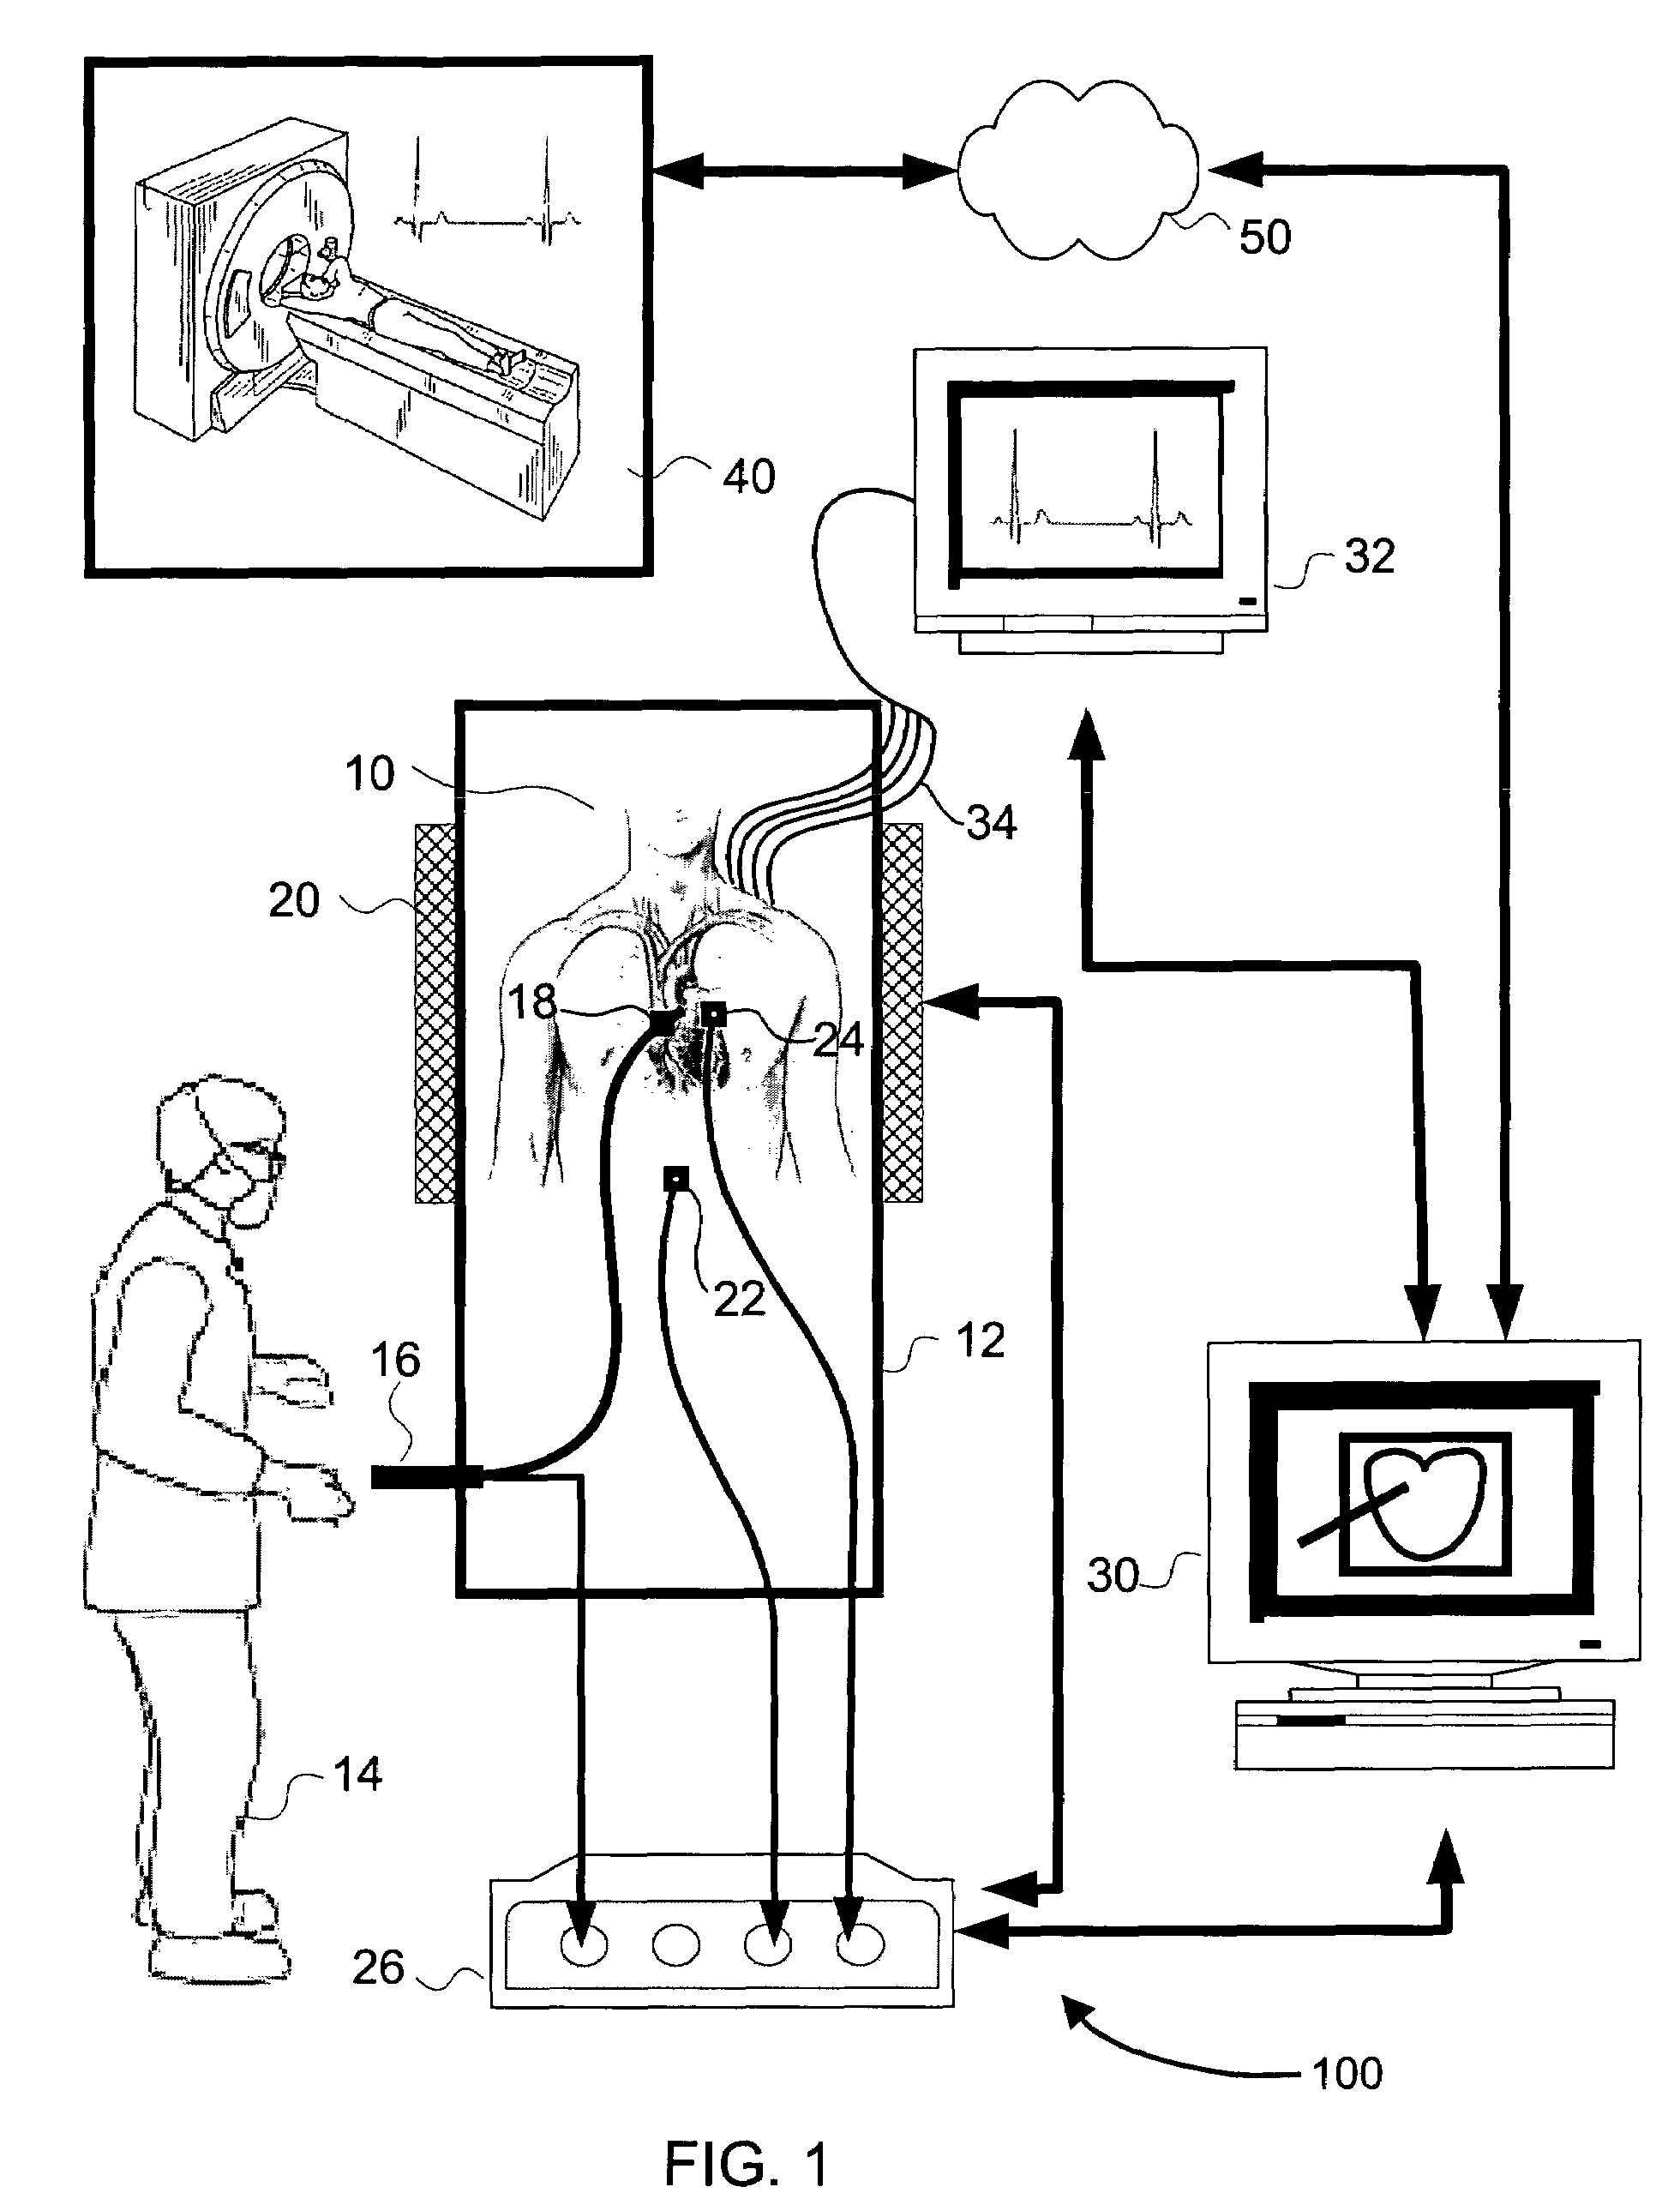 Methods, apparatuses, and systems useful in conducting image guided interventions